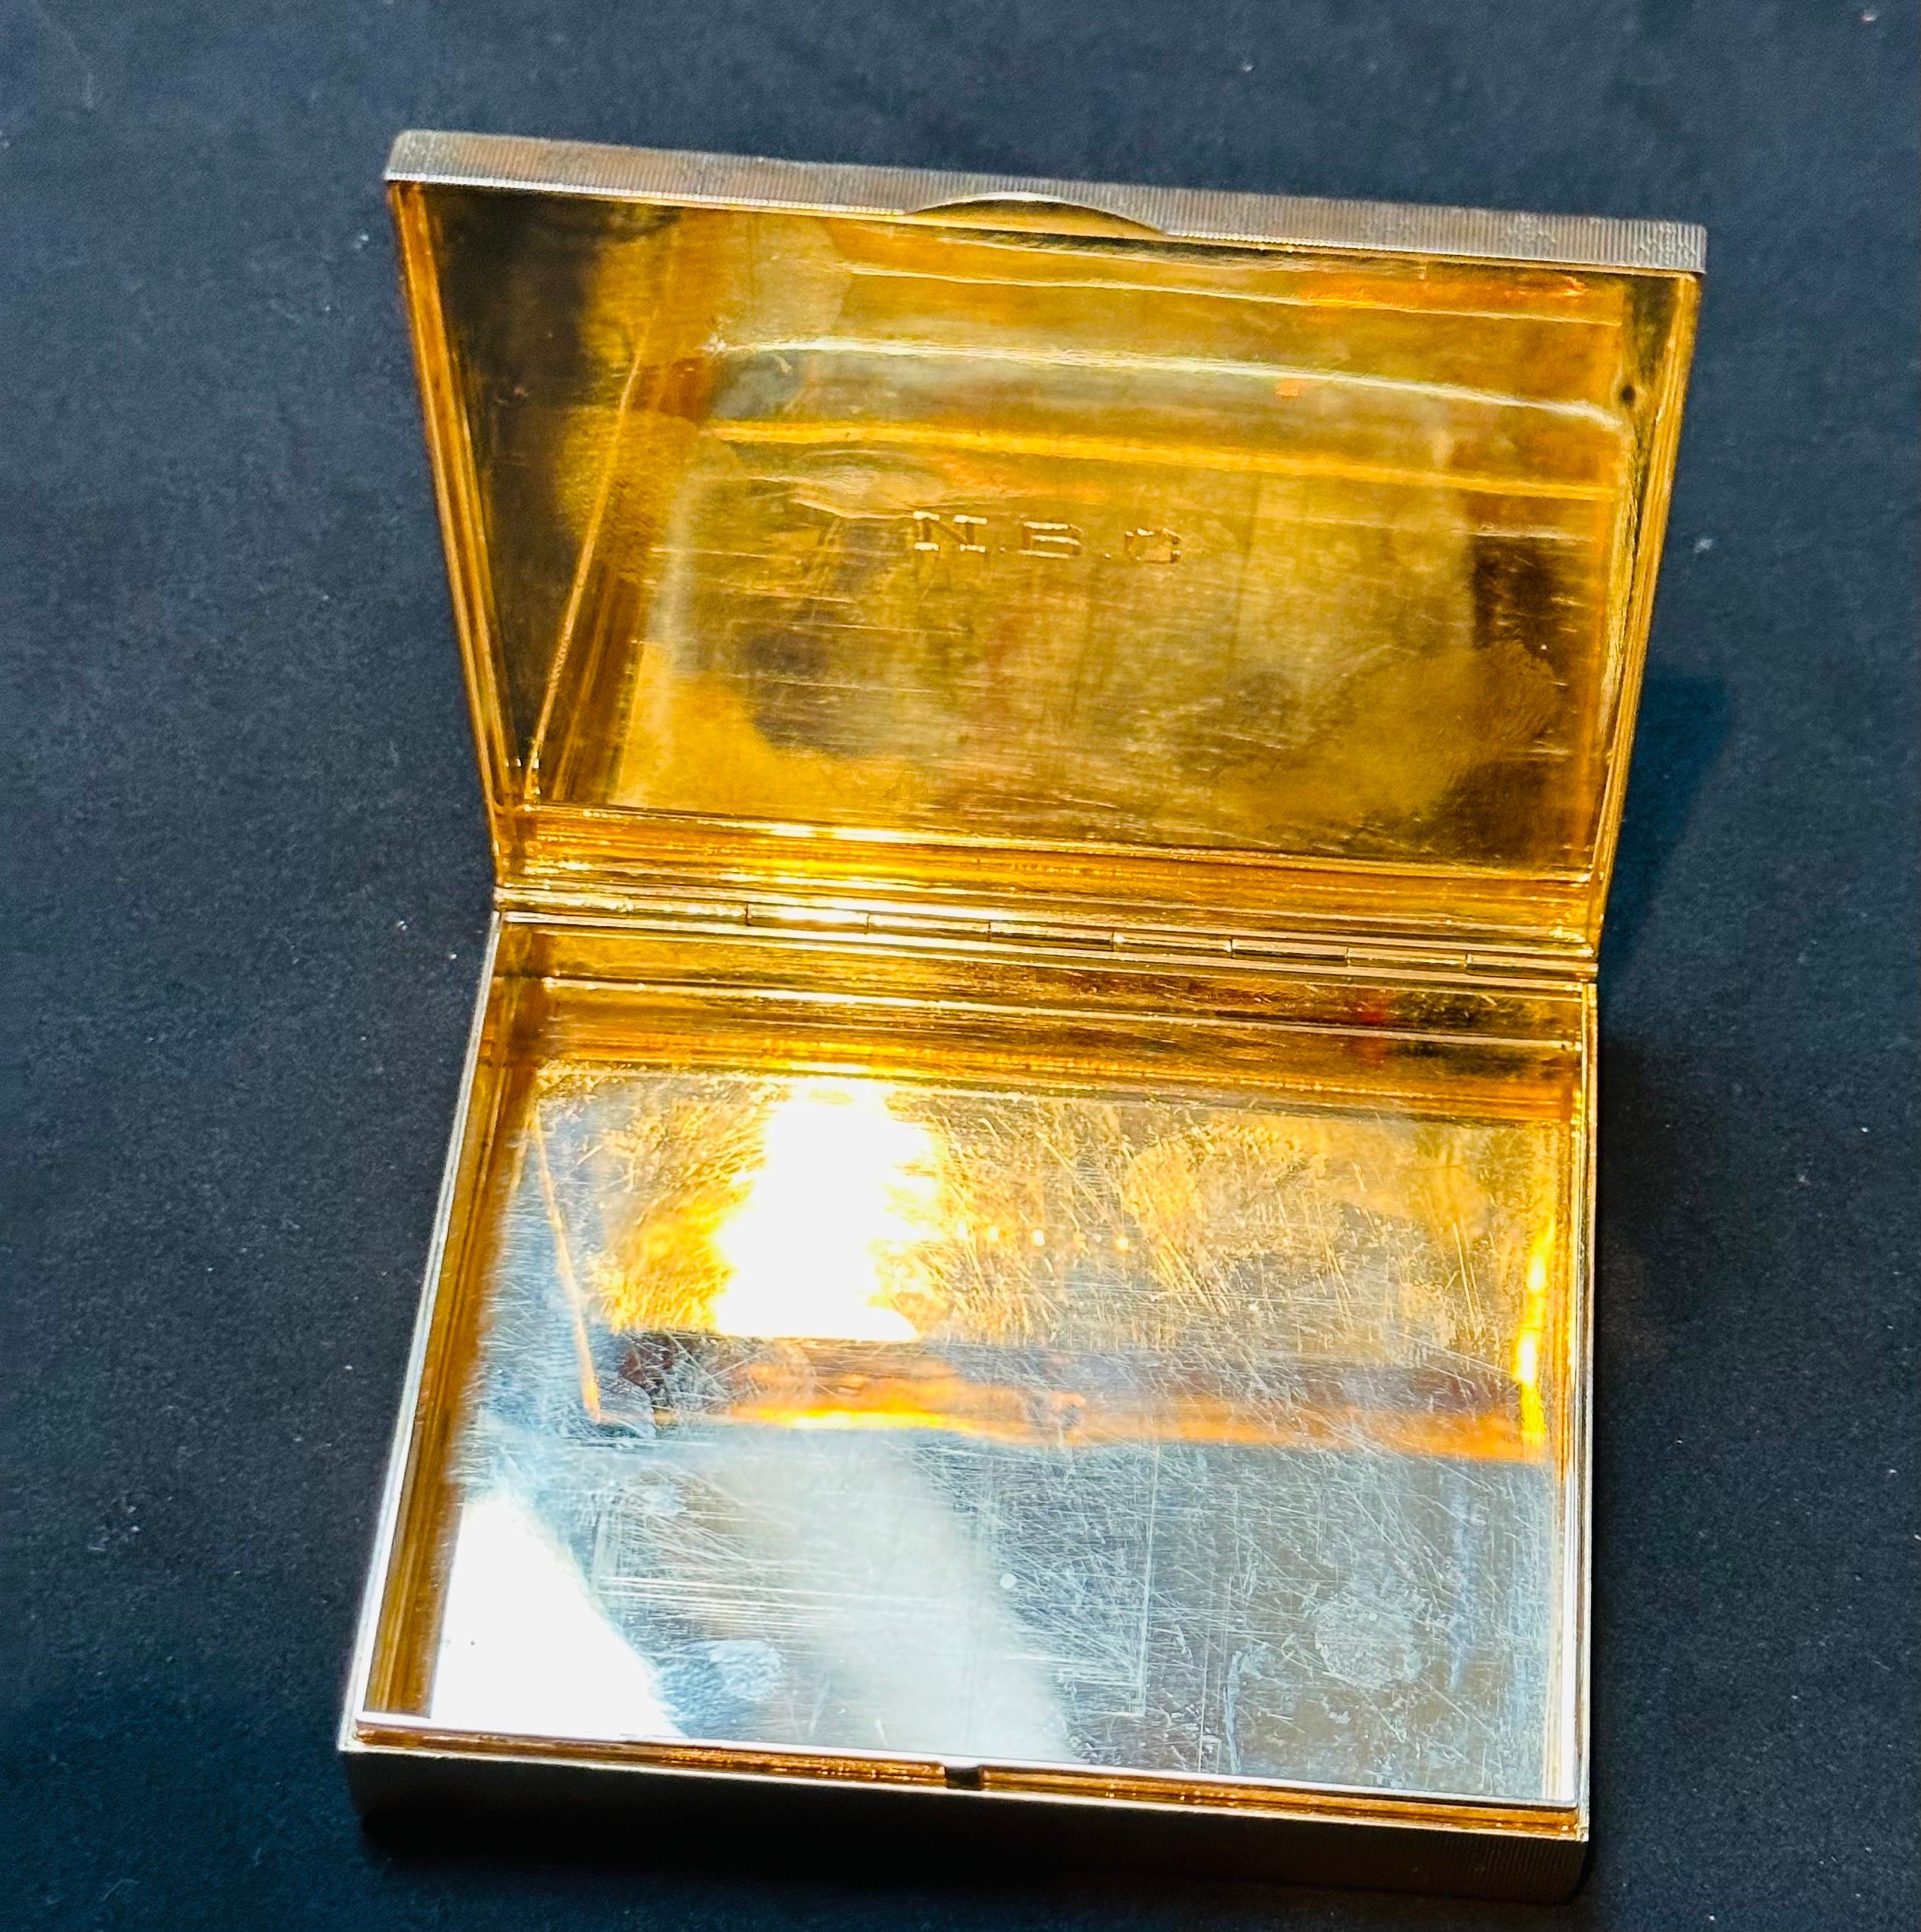 Cartier Gold Compact Powder Box 14 Karat Gold Make-Up Compact 114 Gm In Excellent Condition For Sale In New York, NY